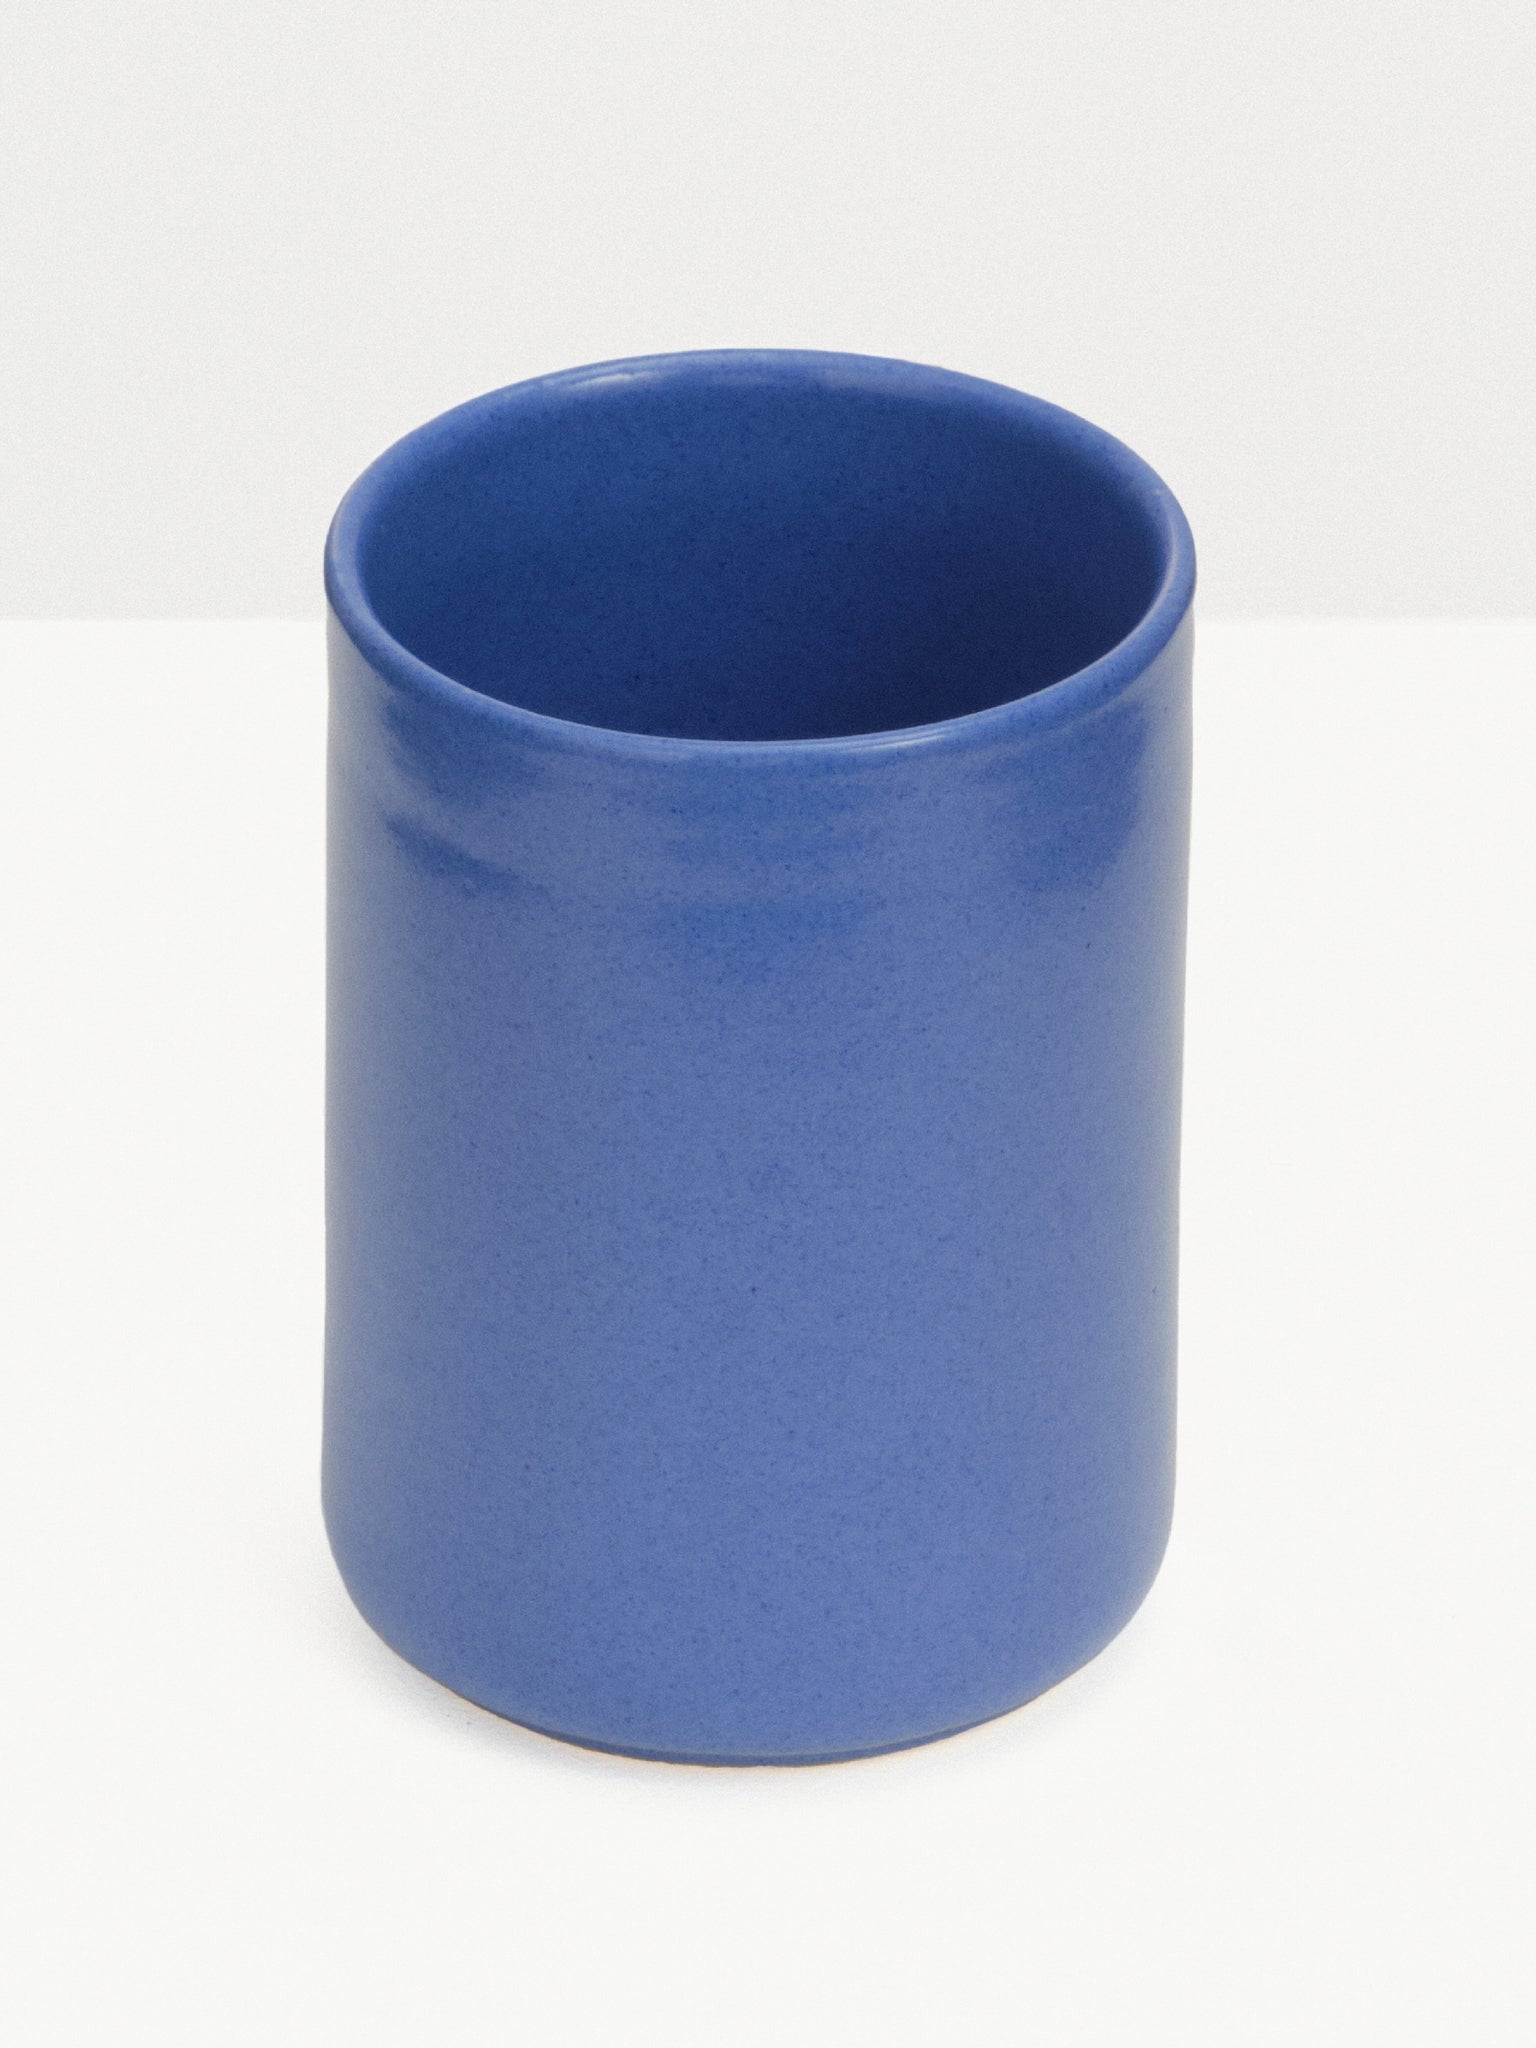 Clay Cup - Lapis